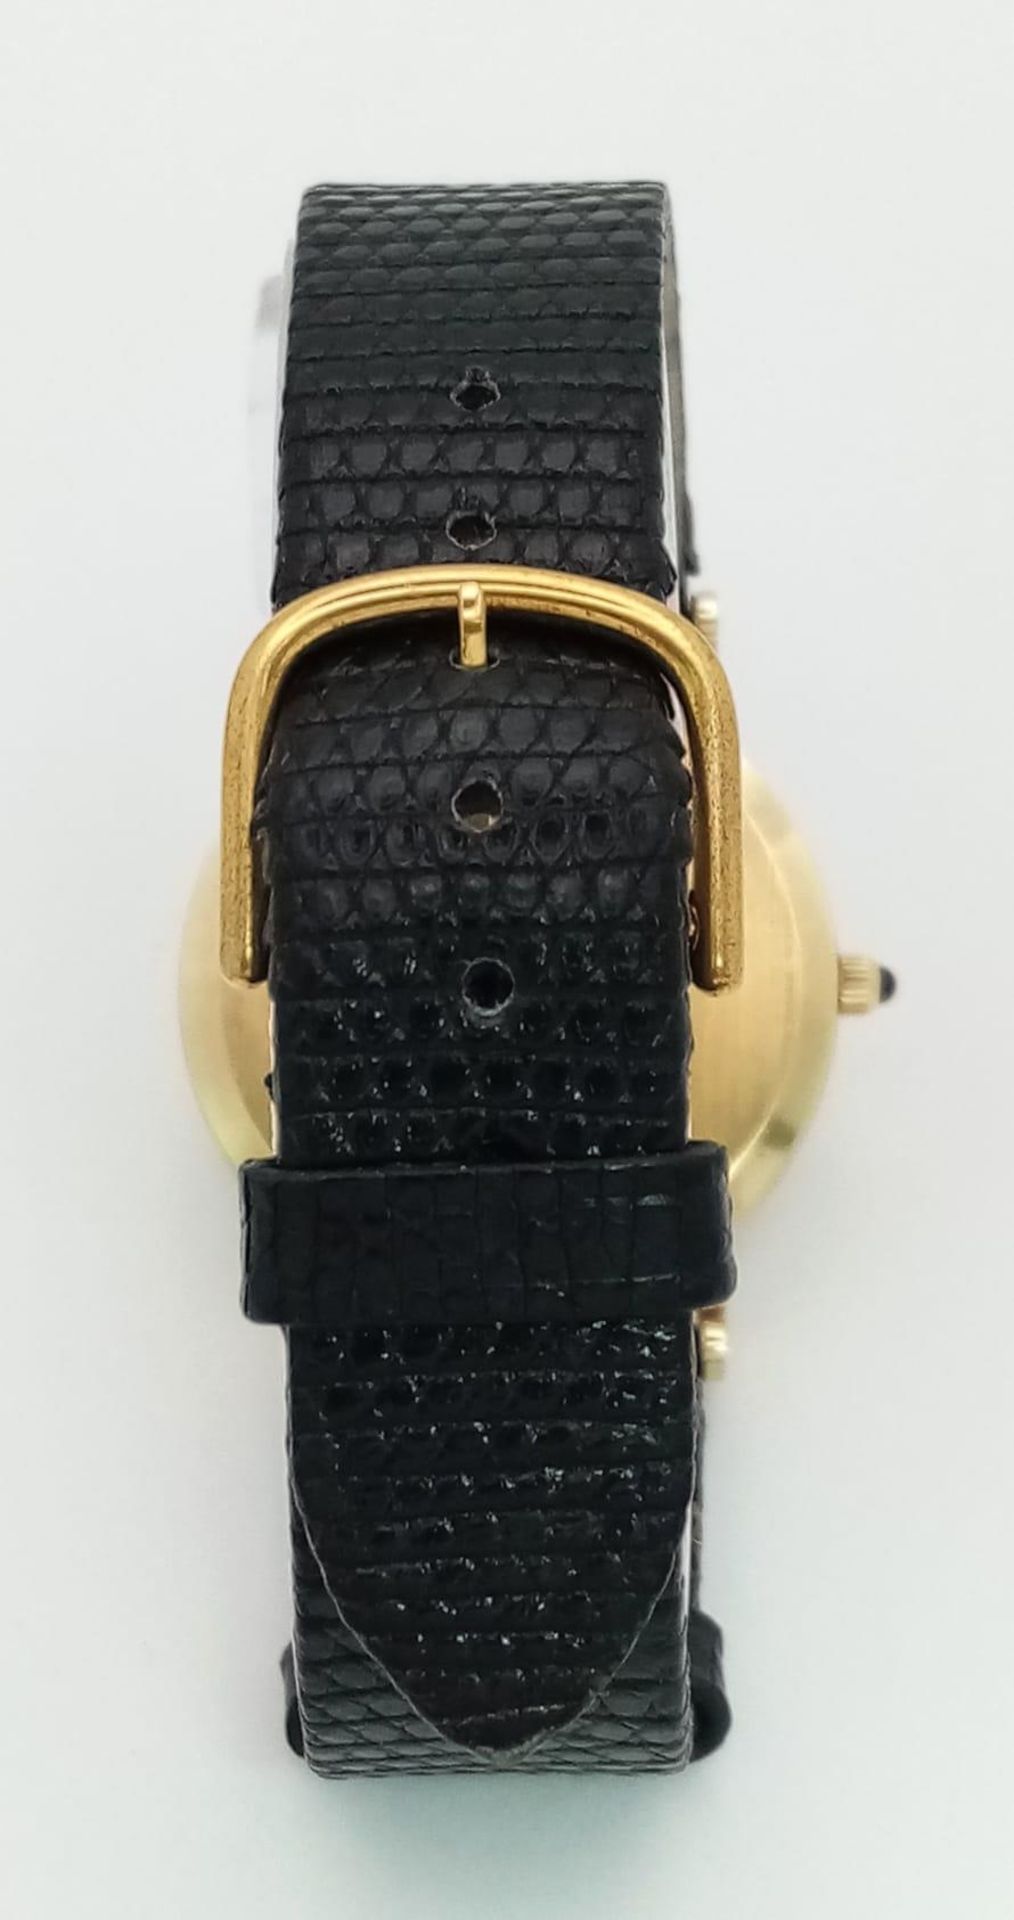 A Vintage 14K Gold Cased Tiffany and Co Ladies 'No Hands' Watch. Black leather strap. 14k gold - Bild 6 aus 9